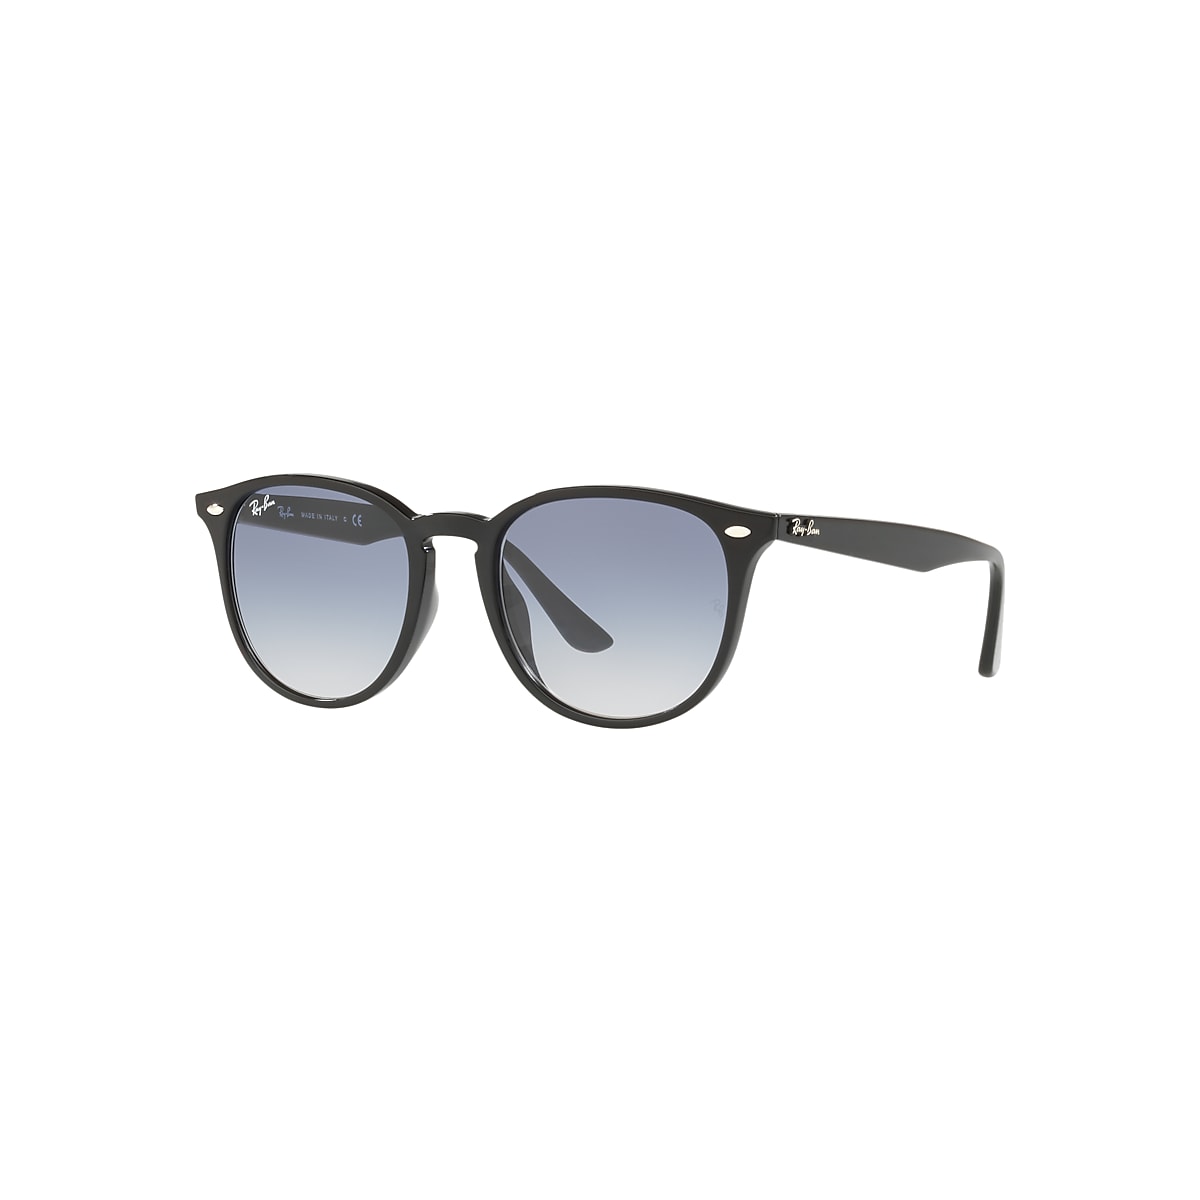 RB4259 Sunglasses in Black and Blue - RB4259F | Ray-Ban® US